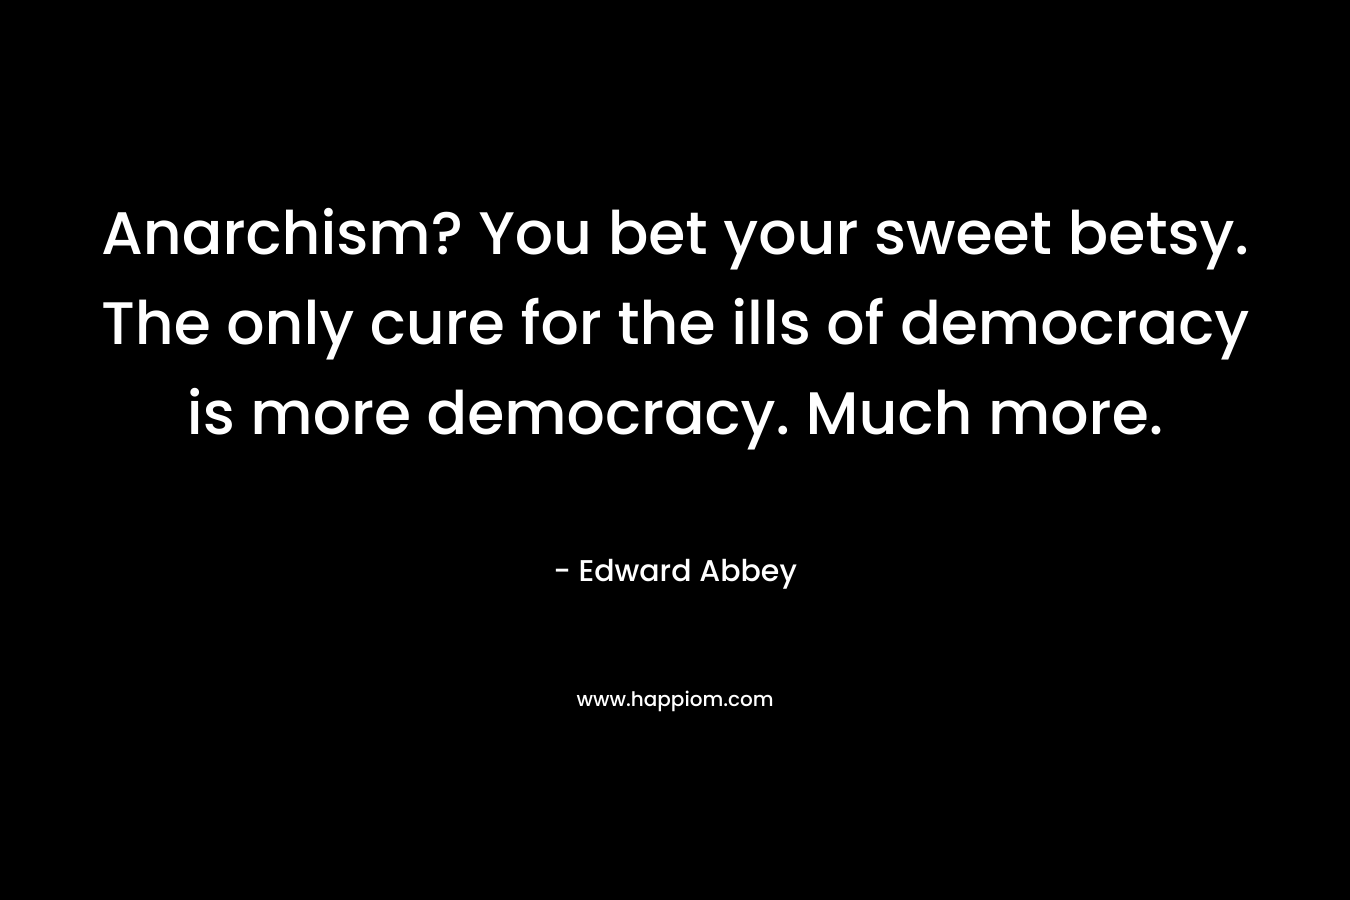 Anarchism? You bet your sweet betsy. The only cure for the ills of democracy is more democracy. Much more.